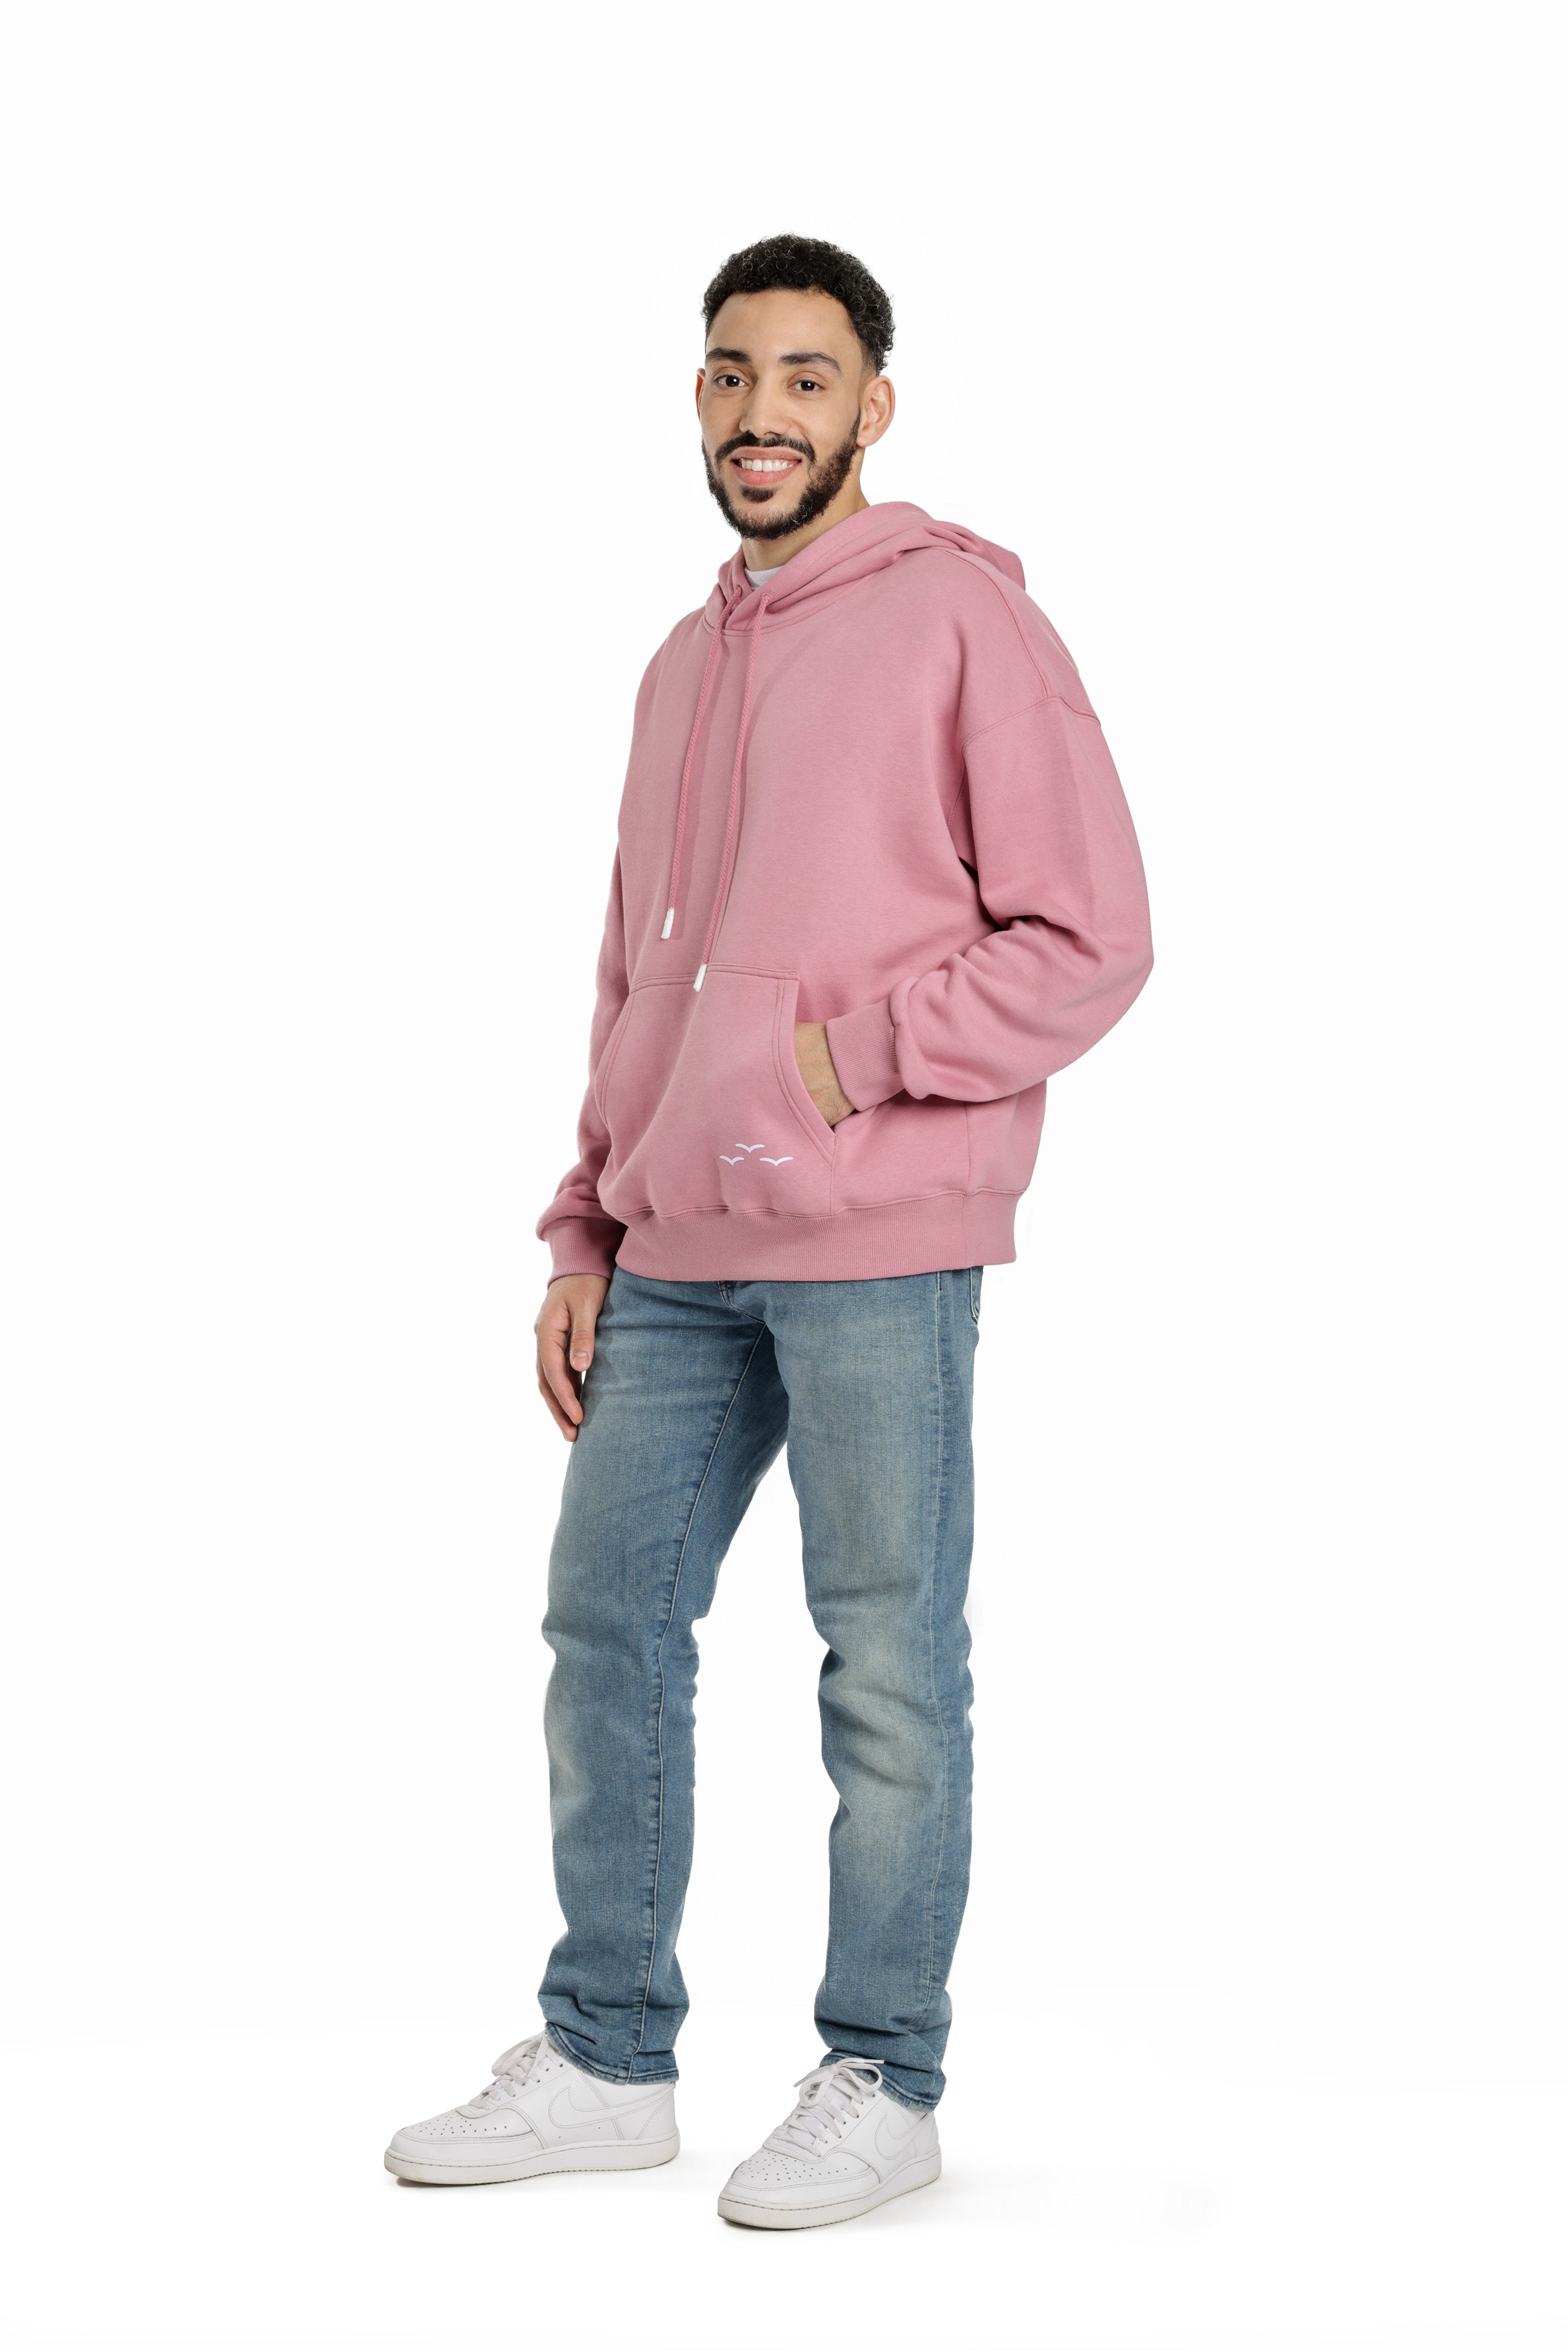 men's relaxed fit hoodie in orchid pink